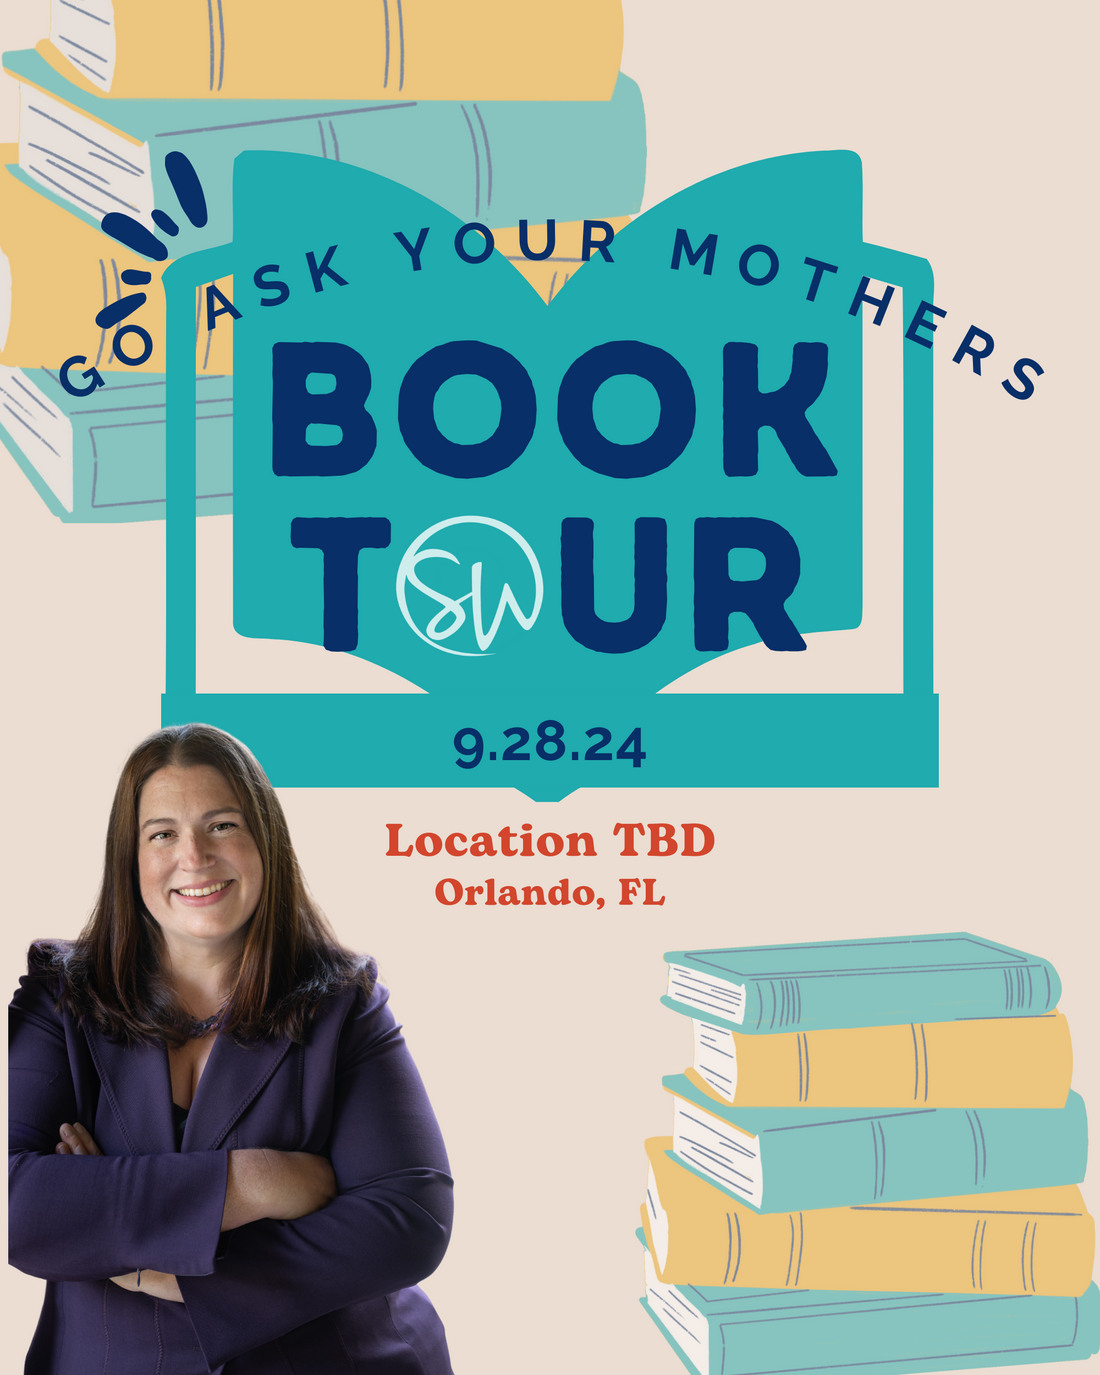 Go Ask Your Mothers w/Sarah Wells - Book Tour 2024 - Orlando, FL - FREE Ticket